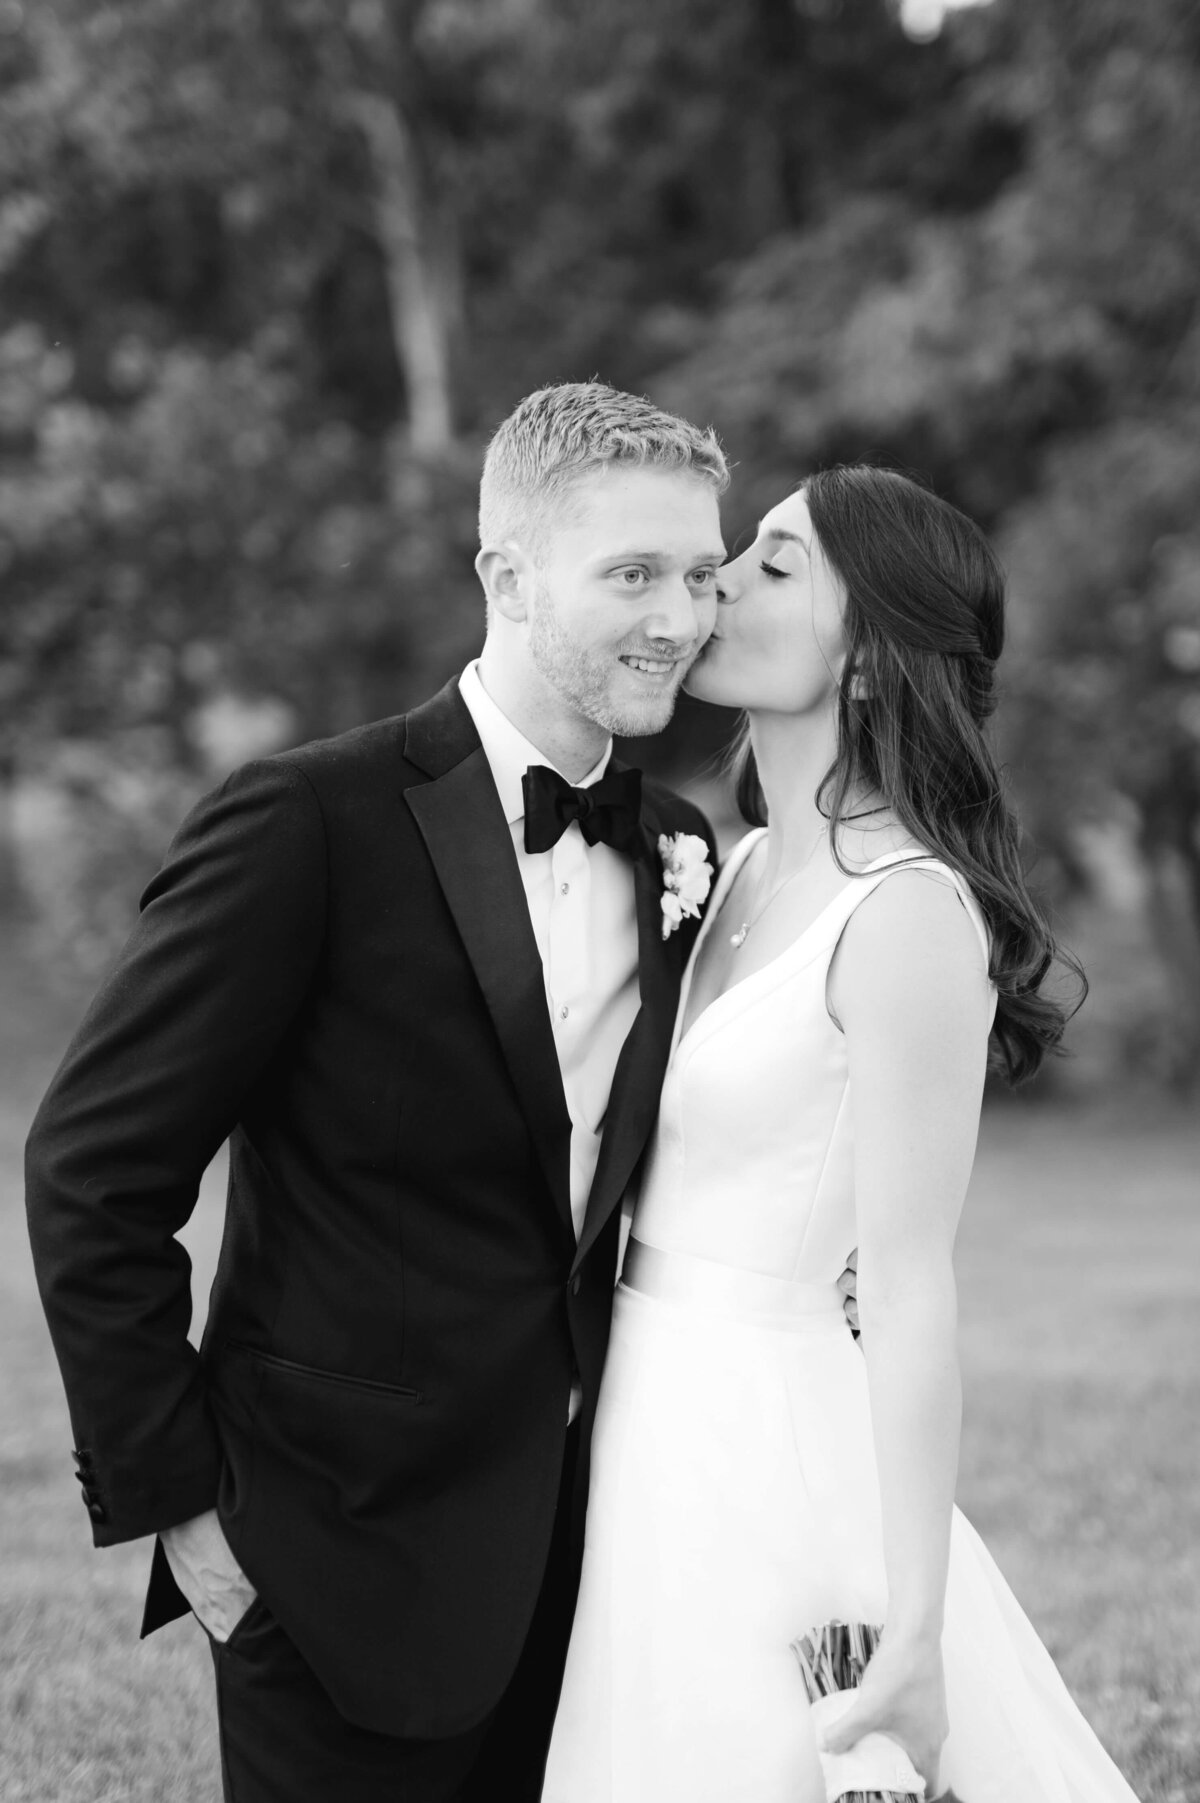 Timeless image of a bride kissing her groom on the cheek during wedding portraits